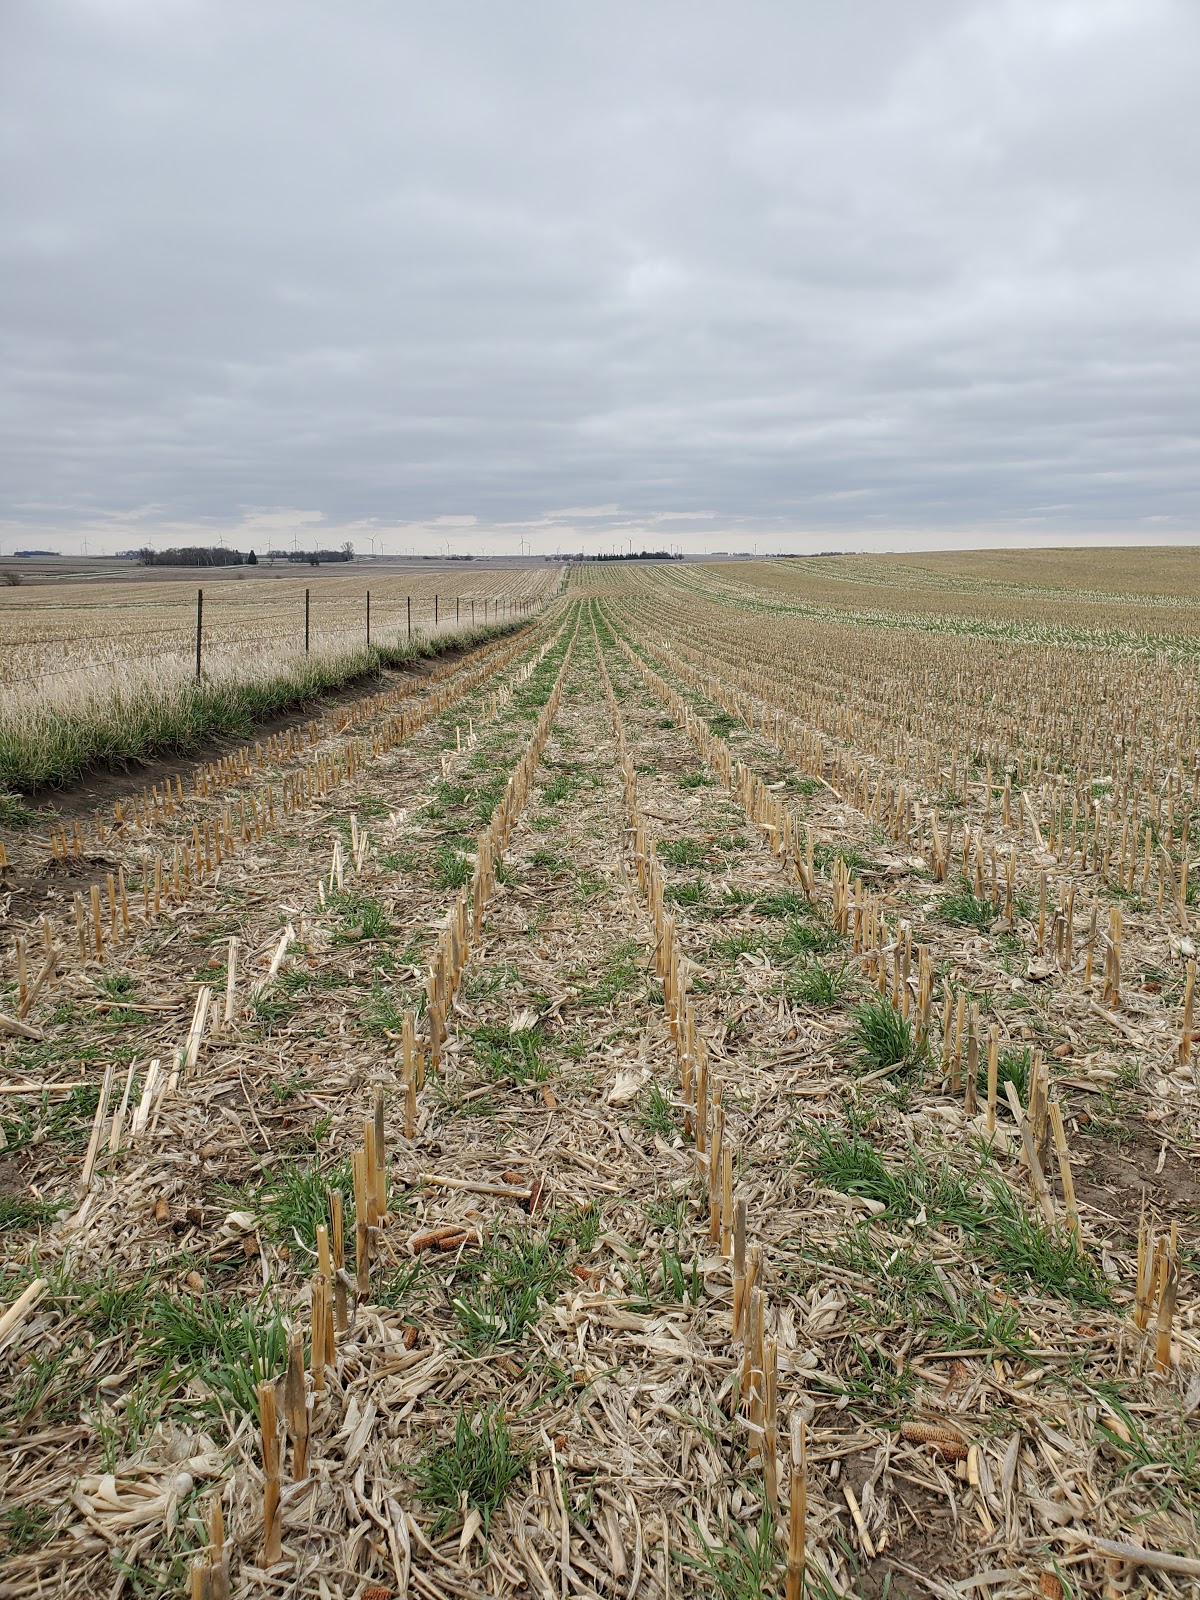 One of Tim’s fields with Winter Rye cover crops emerging.